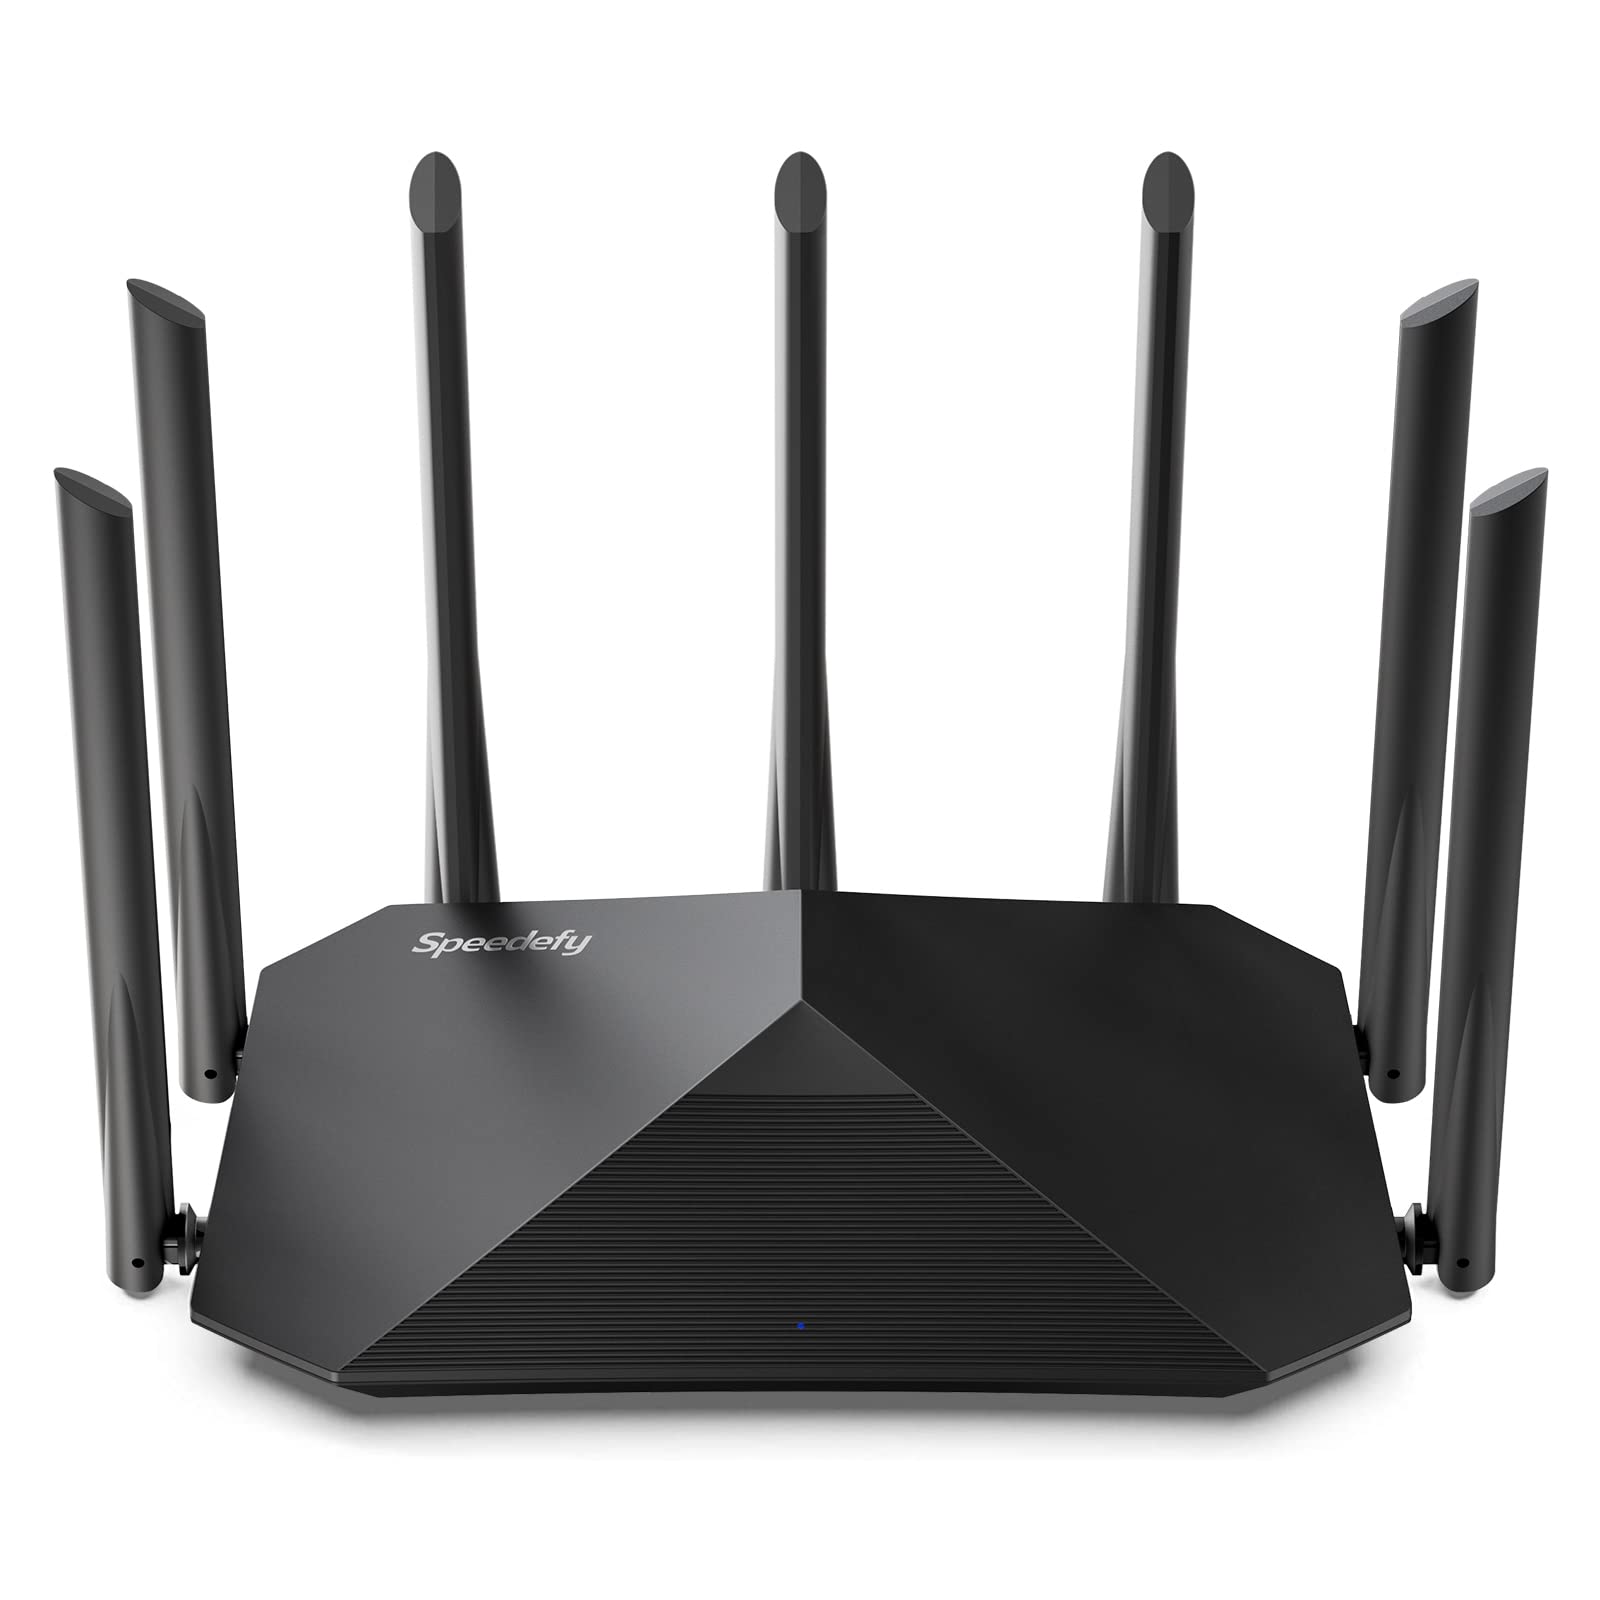 Speedefy AC2100 Smart WiFi Router - Dual Band Gigabit Wireless Router for Home & Gaming, 4x4 MU-MIMO, 7x6dBi External Antennas for Strong Signal, Parental Control, Support IPv6 (Model K7)